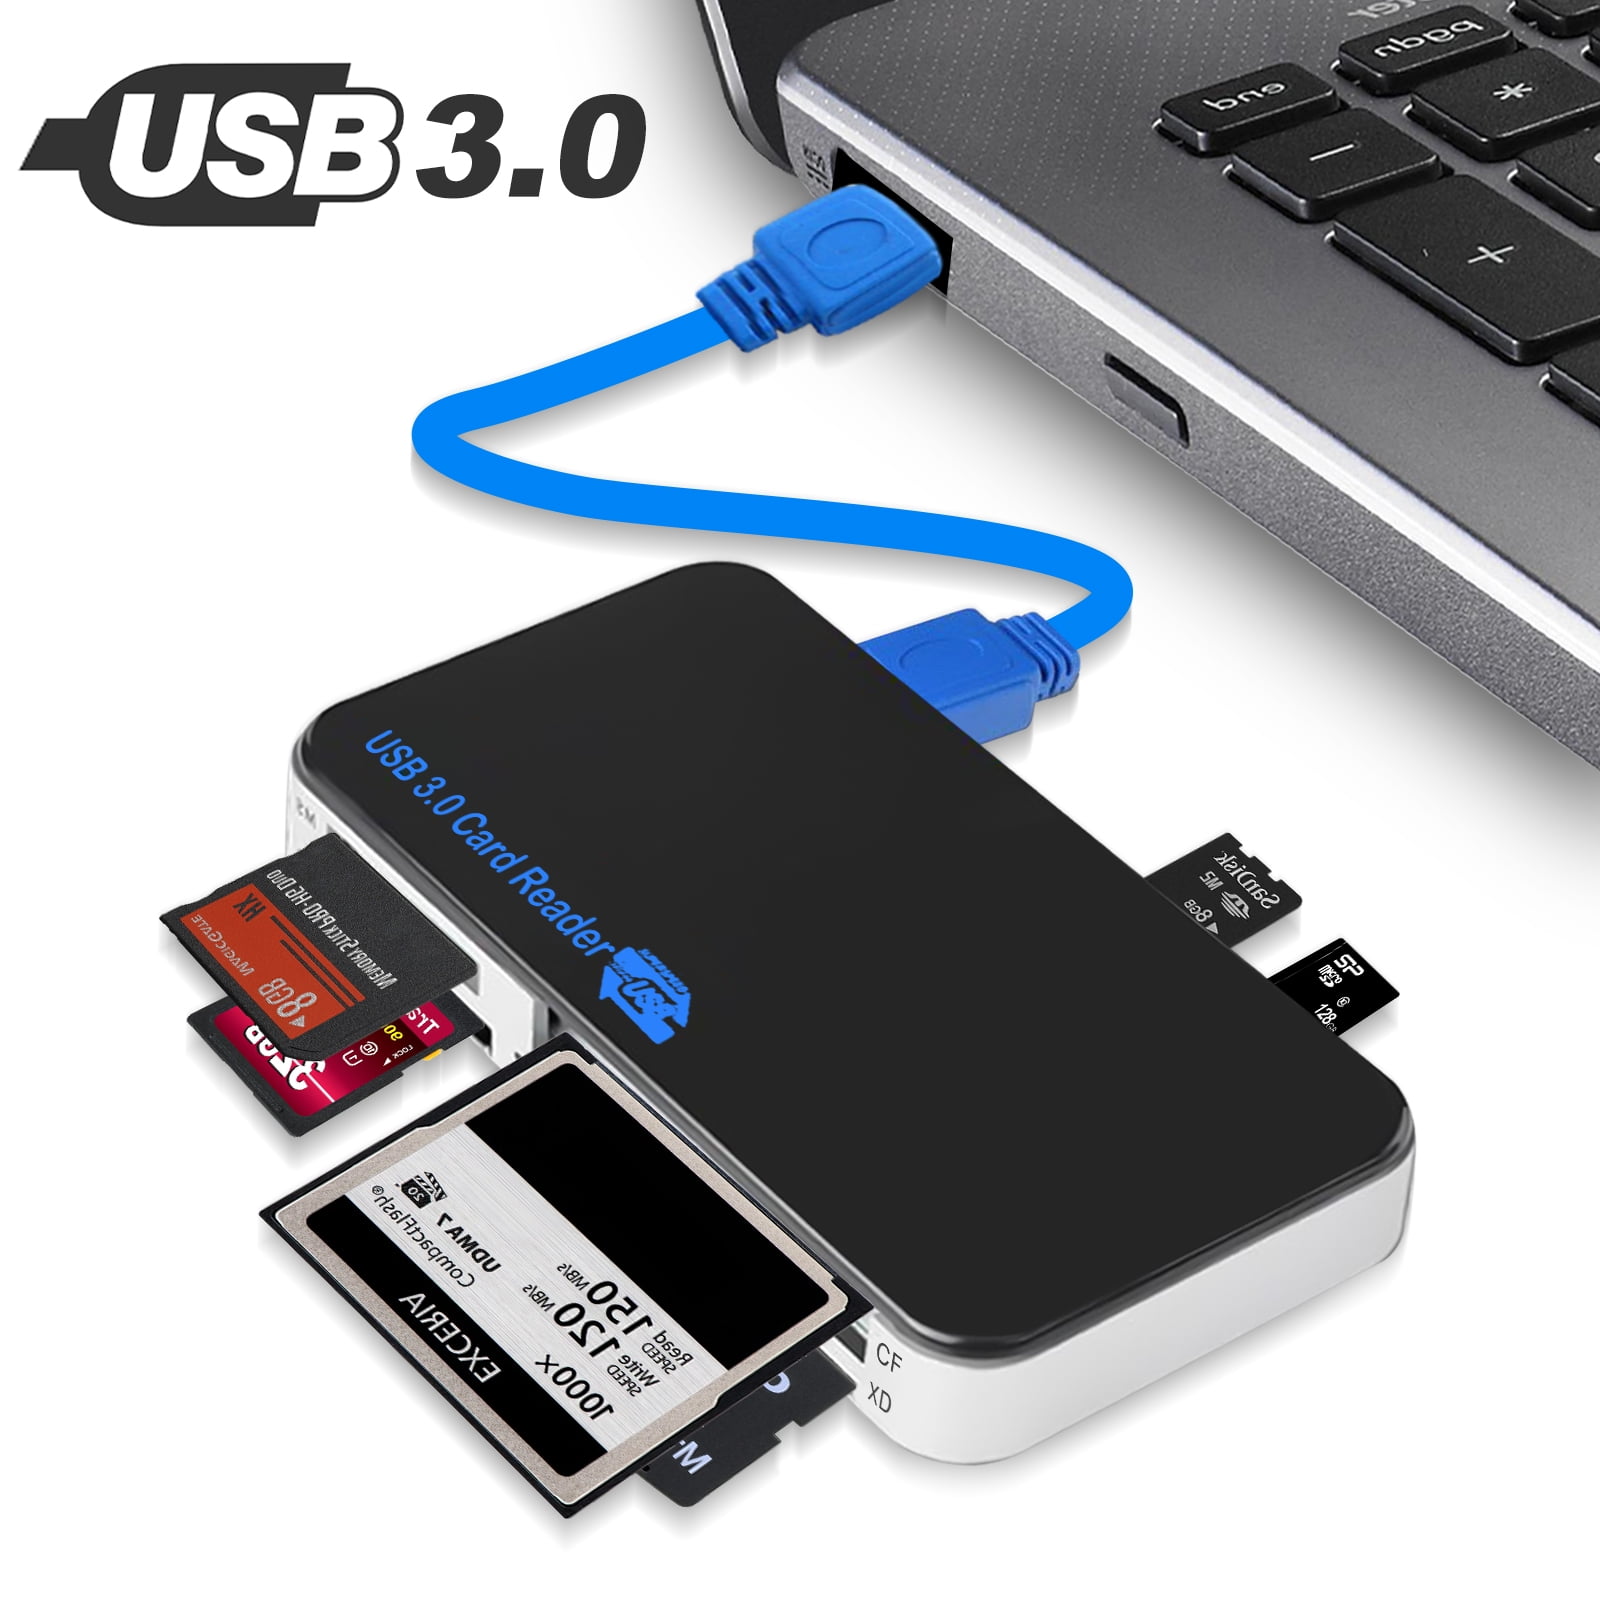 Usb Multi-Card Reader/Writer For Sd Cards & More, Five Below